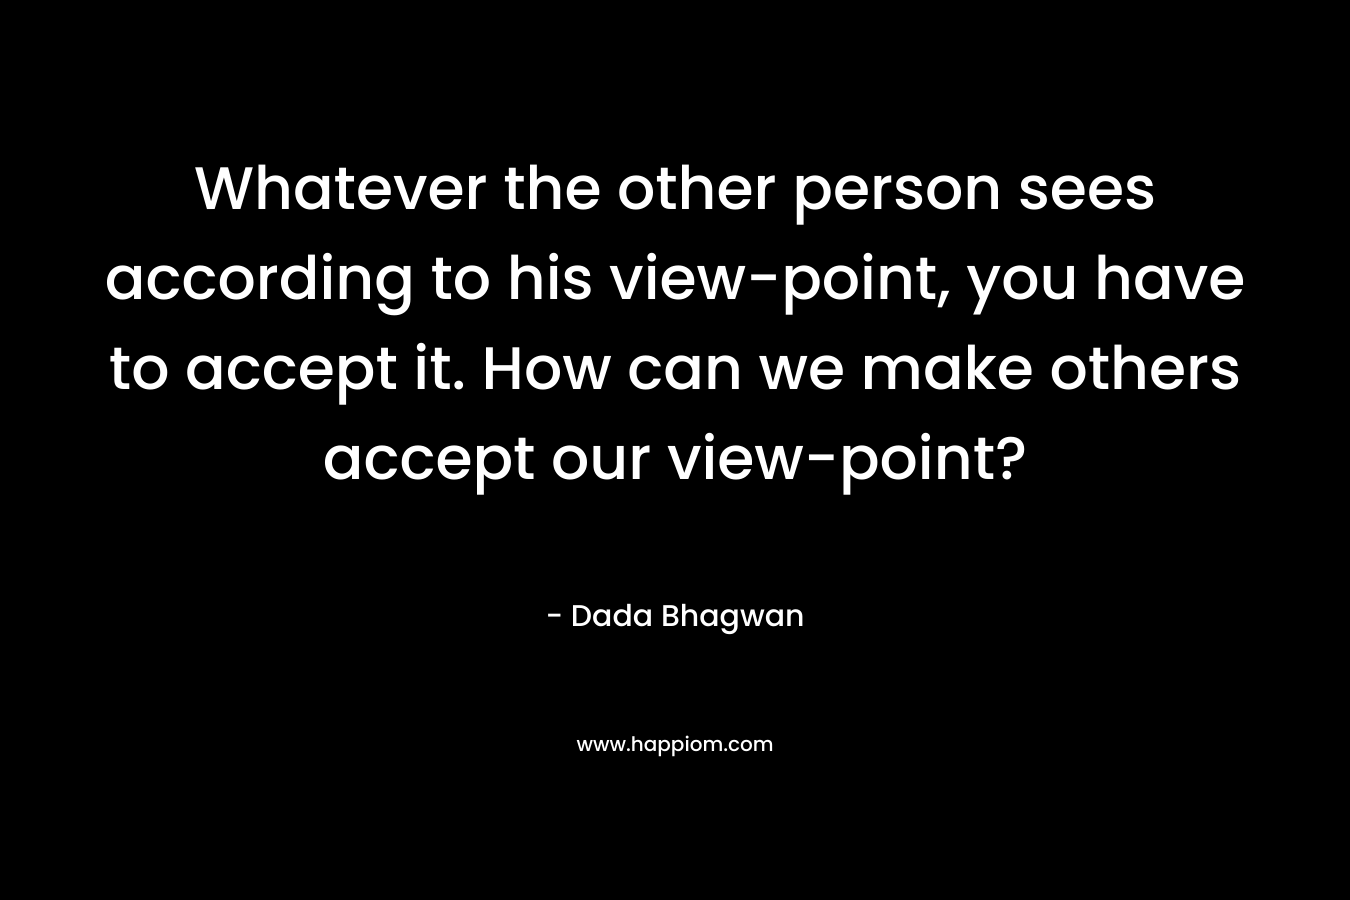 Whatever the other person sees according to his view-point, you have to accept it. How can we make others accept our view-point?